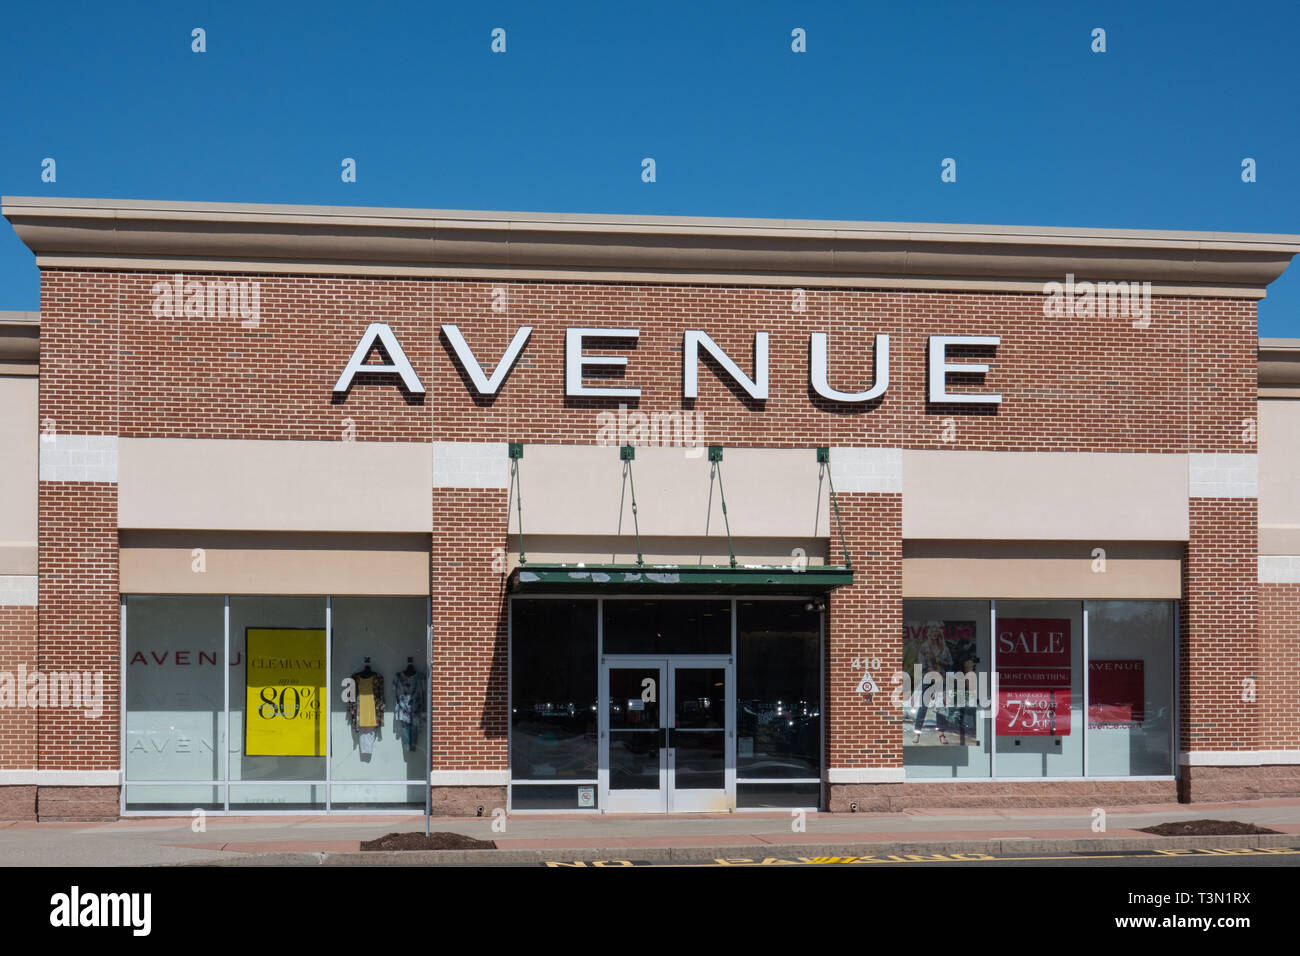 Trenton, NJ - April 1, 2019: This Avenue store is located at Hamilton Marketplace. Avenue a clothing store specializing in plus sizes Photo - Alamy